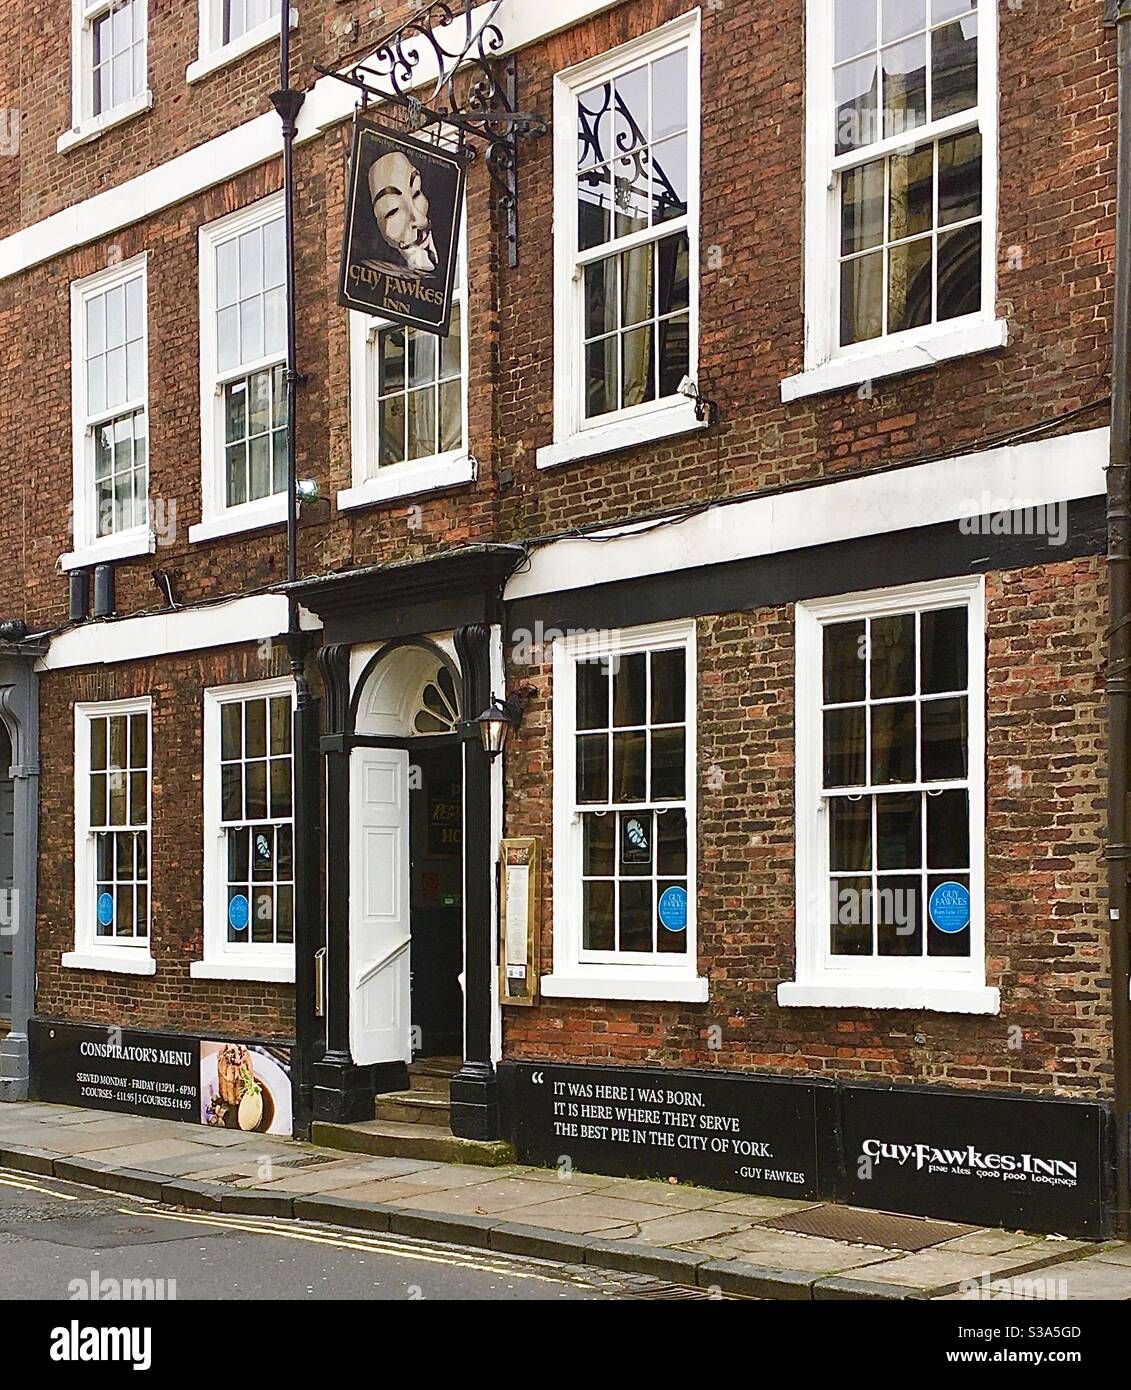 The Guy Fawkes Inn in York, England, birthplace of Guy Fawkes (1570-1606), one of the Catholic plotters against King James the 1st in 1605. Fawkes was discovered guarding gunpowder below Parliament. Stock Photo